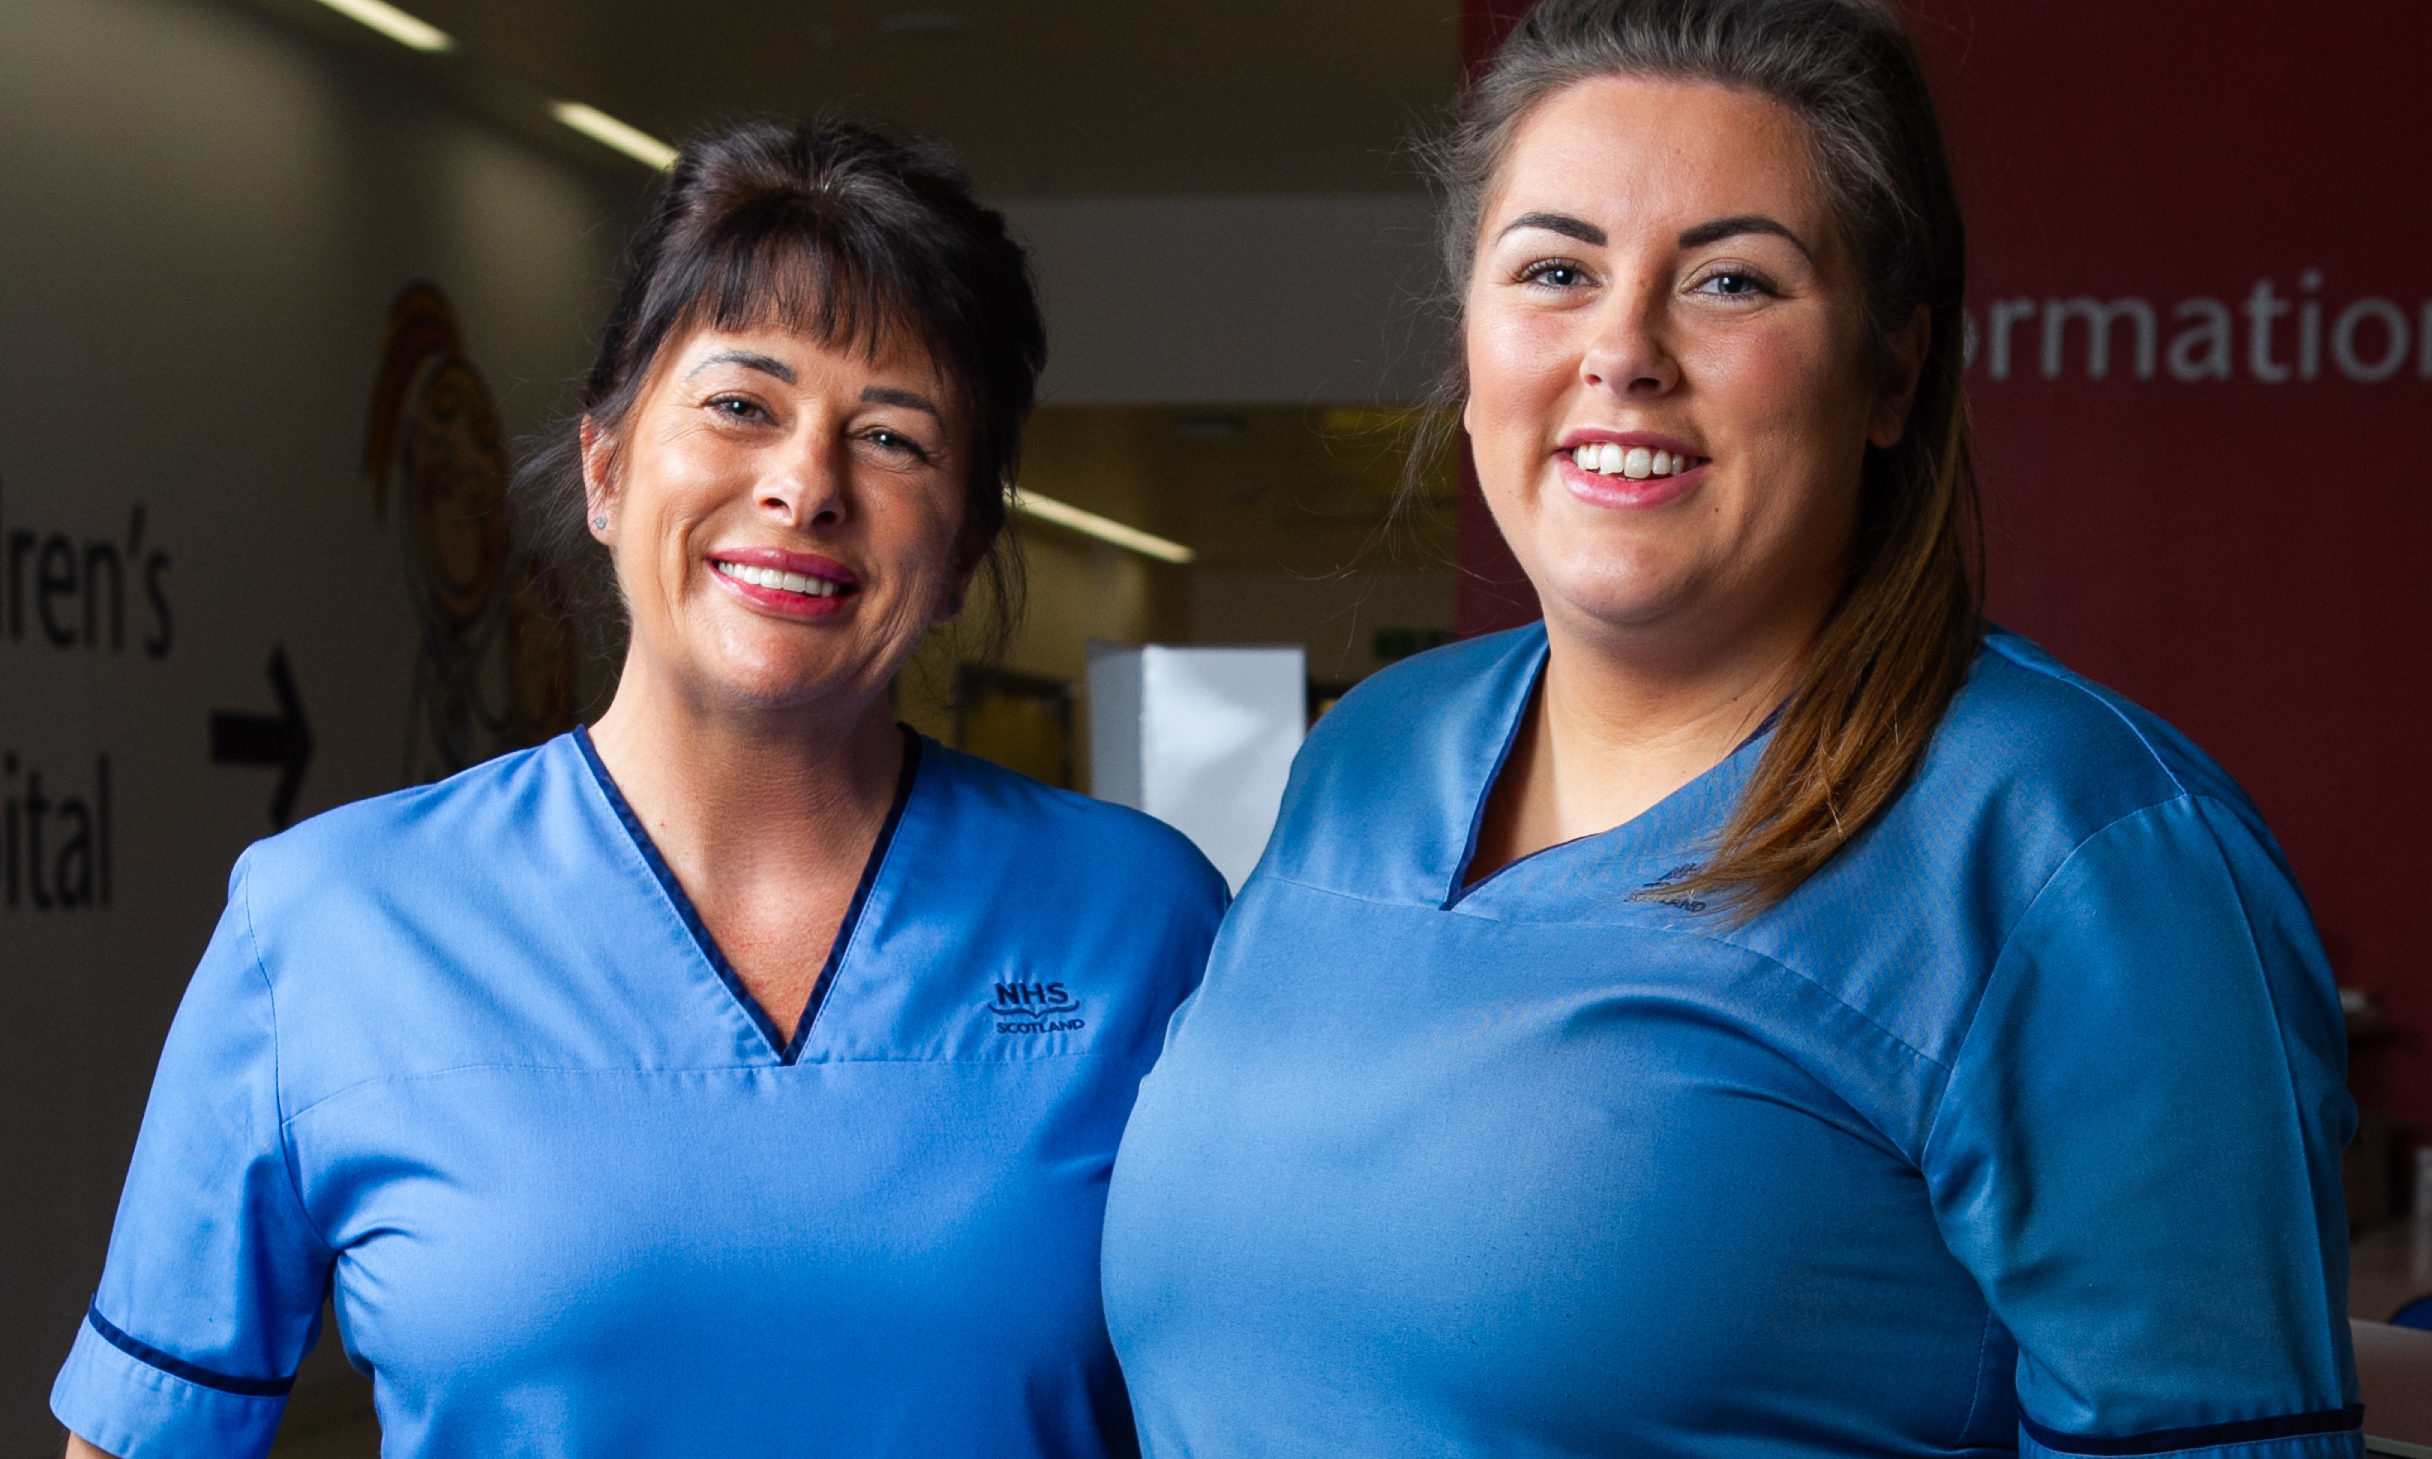 Mother and daughter, Janice and Leanne Kyle, who studied and graduated at nursing at the same time, and now are both working in the same hospital, at the Queen Elizabeth University Hospital in  Glasgow. (Andrrew Cawley)